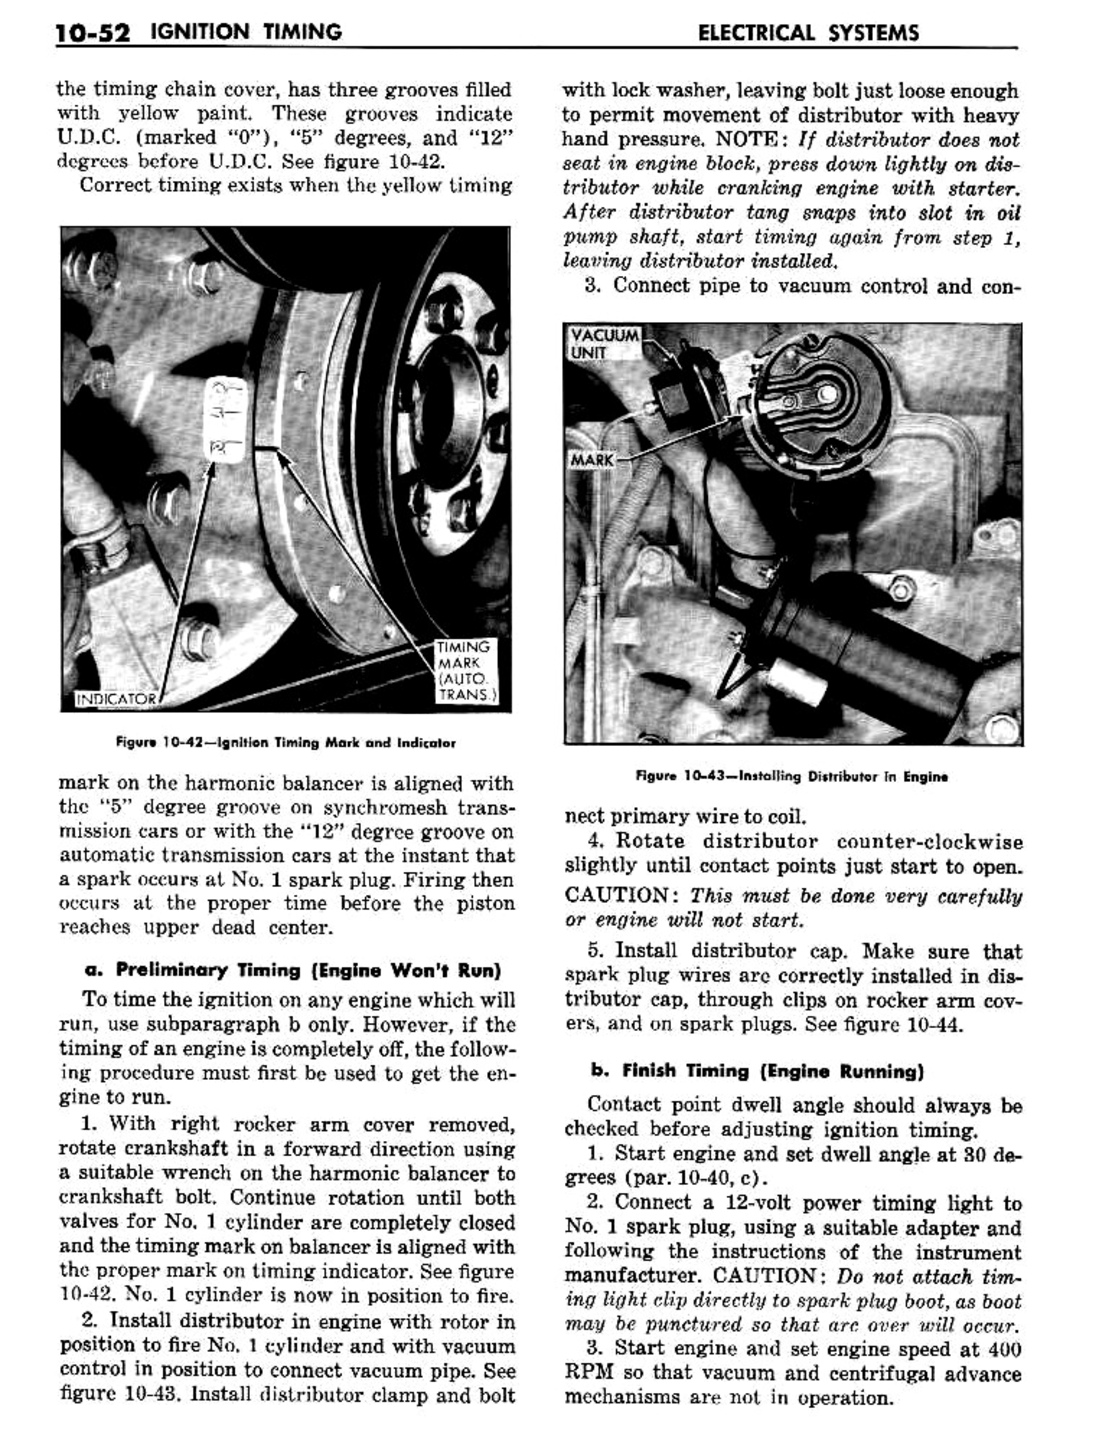 n_11 1960 Buick Shop Manual - Electrical Systems-052-052.jpg